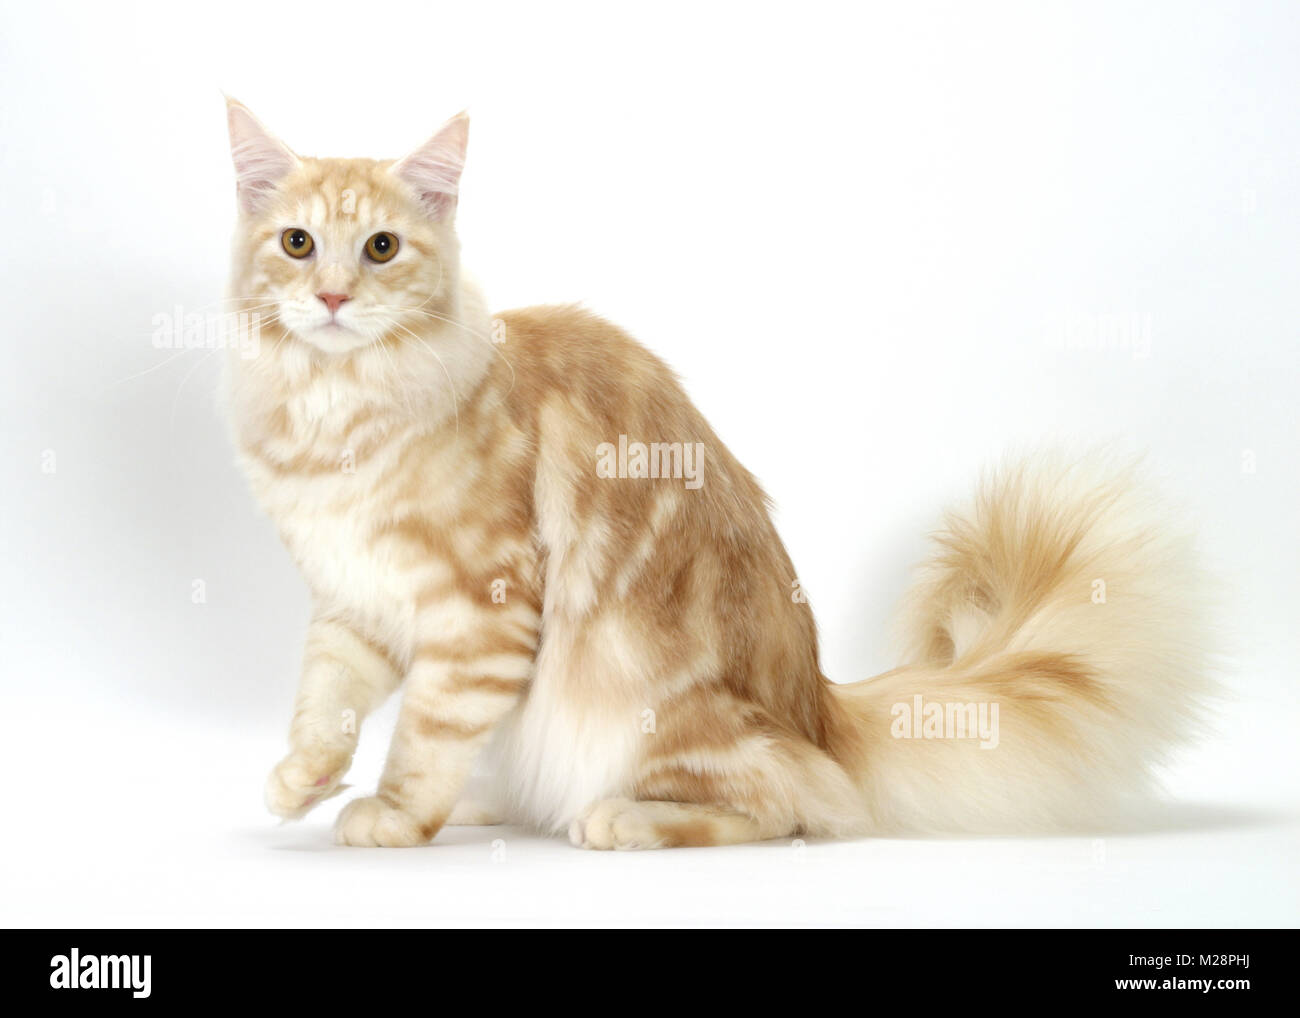 Red Silver Classic Tabby Maine Coon Stockfotografie - Alamy